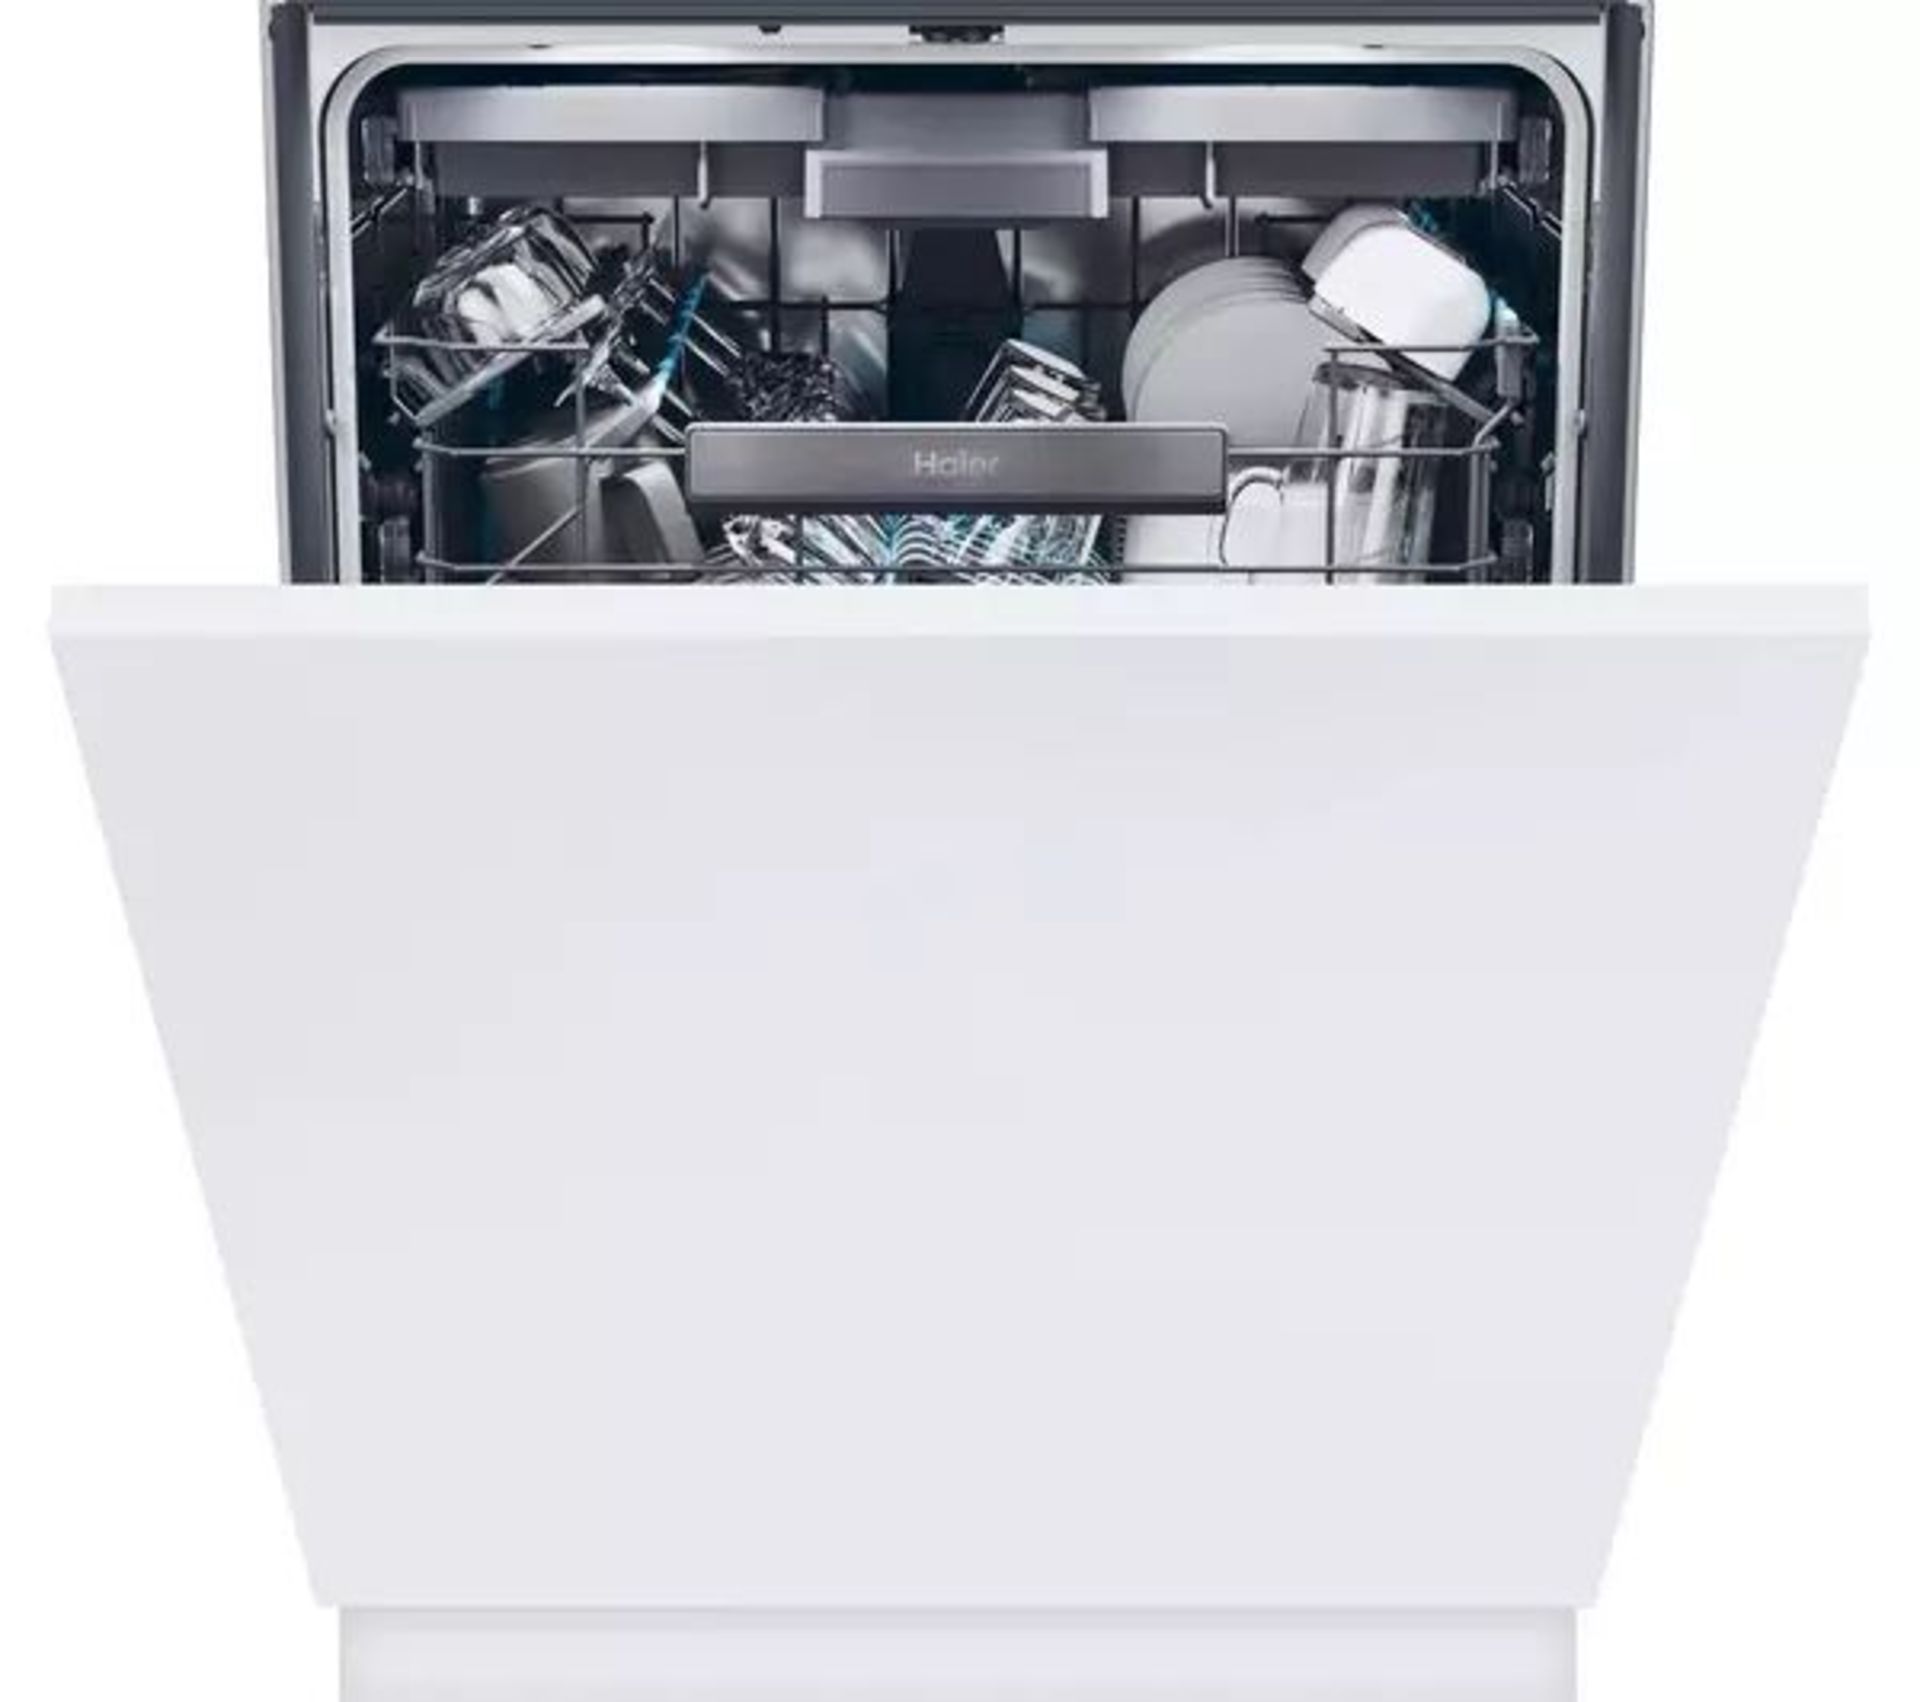 HAIER XS 6B0S3FSB-80 Full-size Fully Integrated Dishwasher. - S2. RRP £849.00. Tired of plates